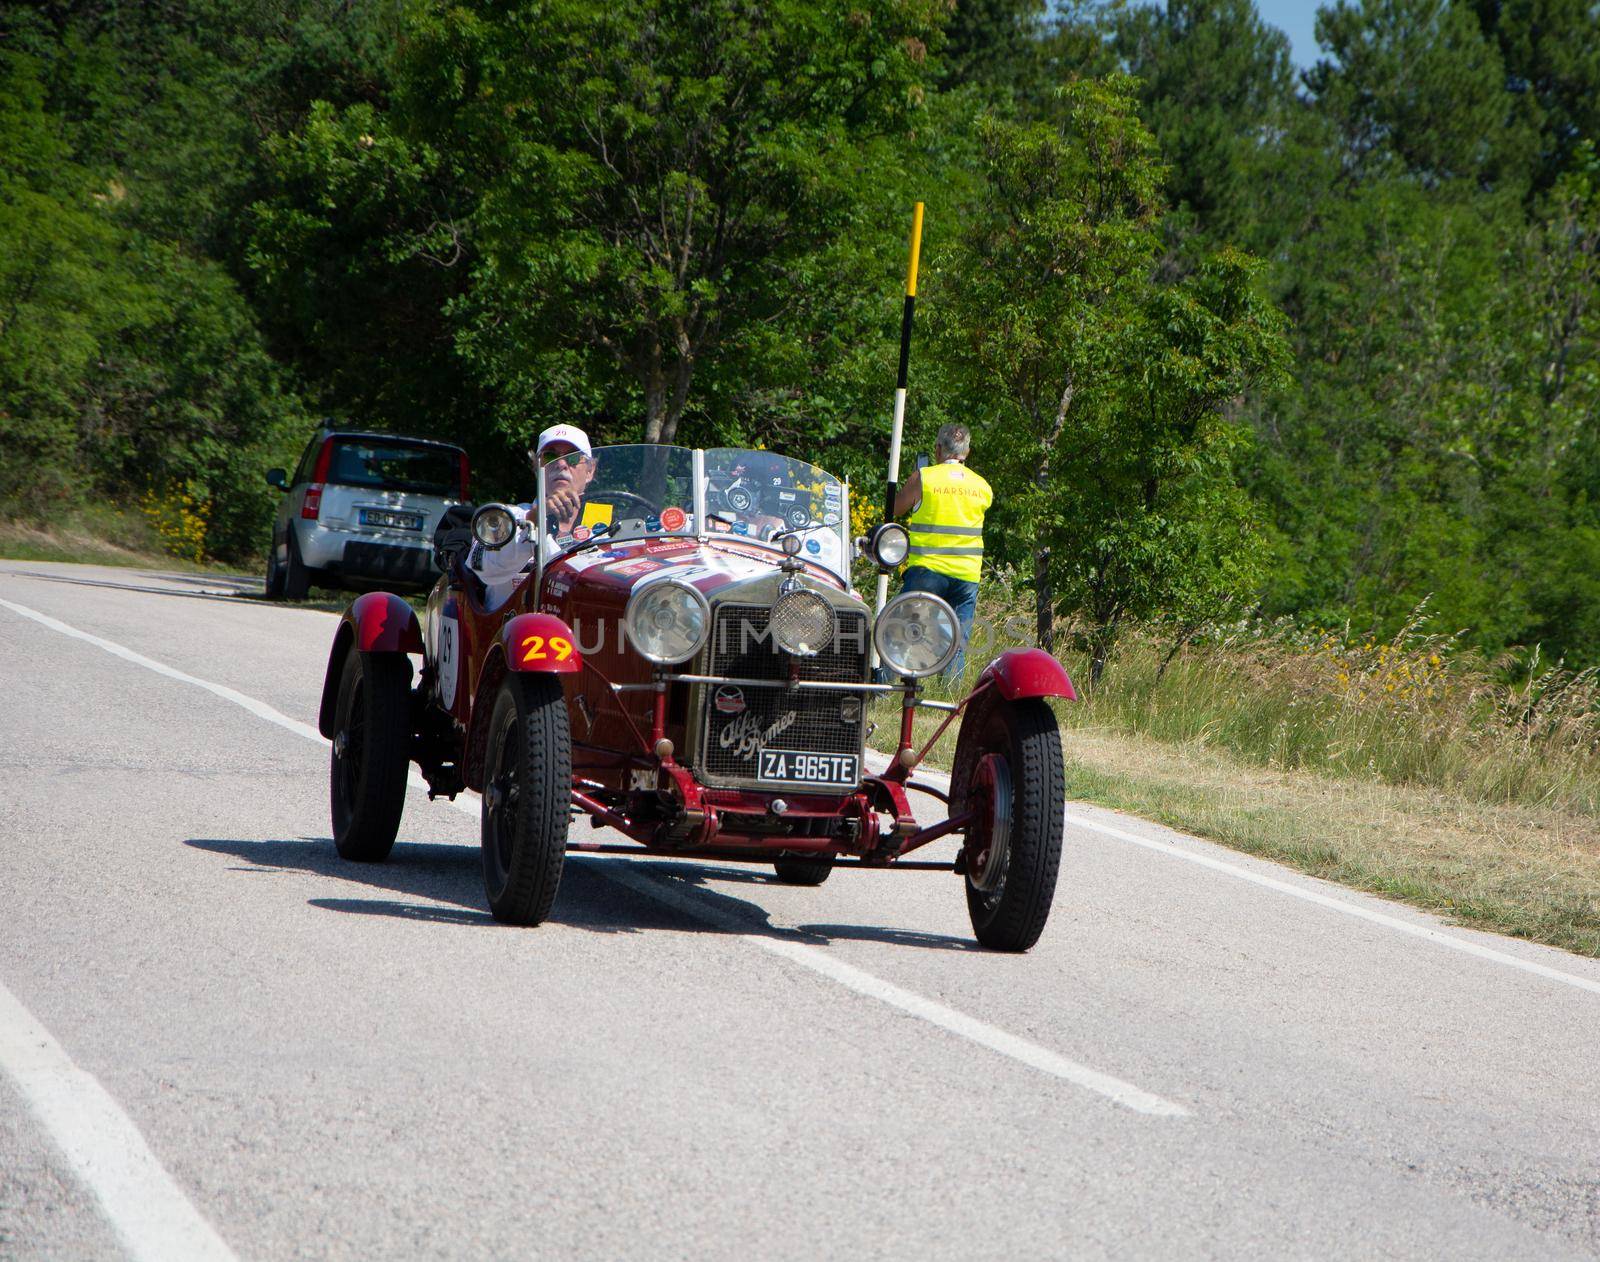 ALFA ROMEO 6C 1500 SS MM 1928 on an old racing car in rally Mille Miglia 2022 the famous italian historical race (1927-1957 by massimocampanari